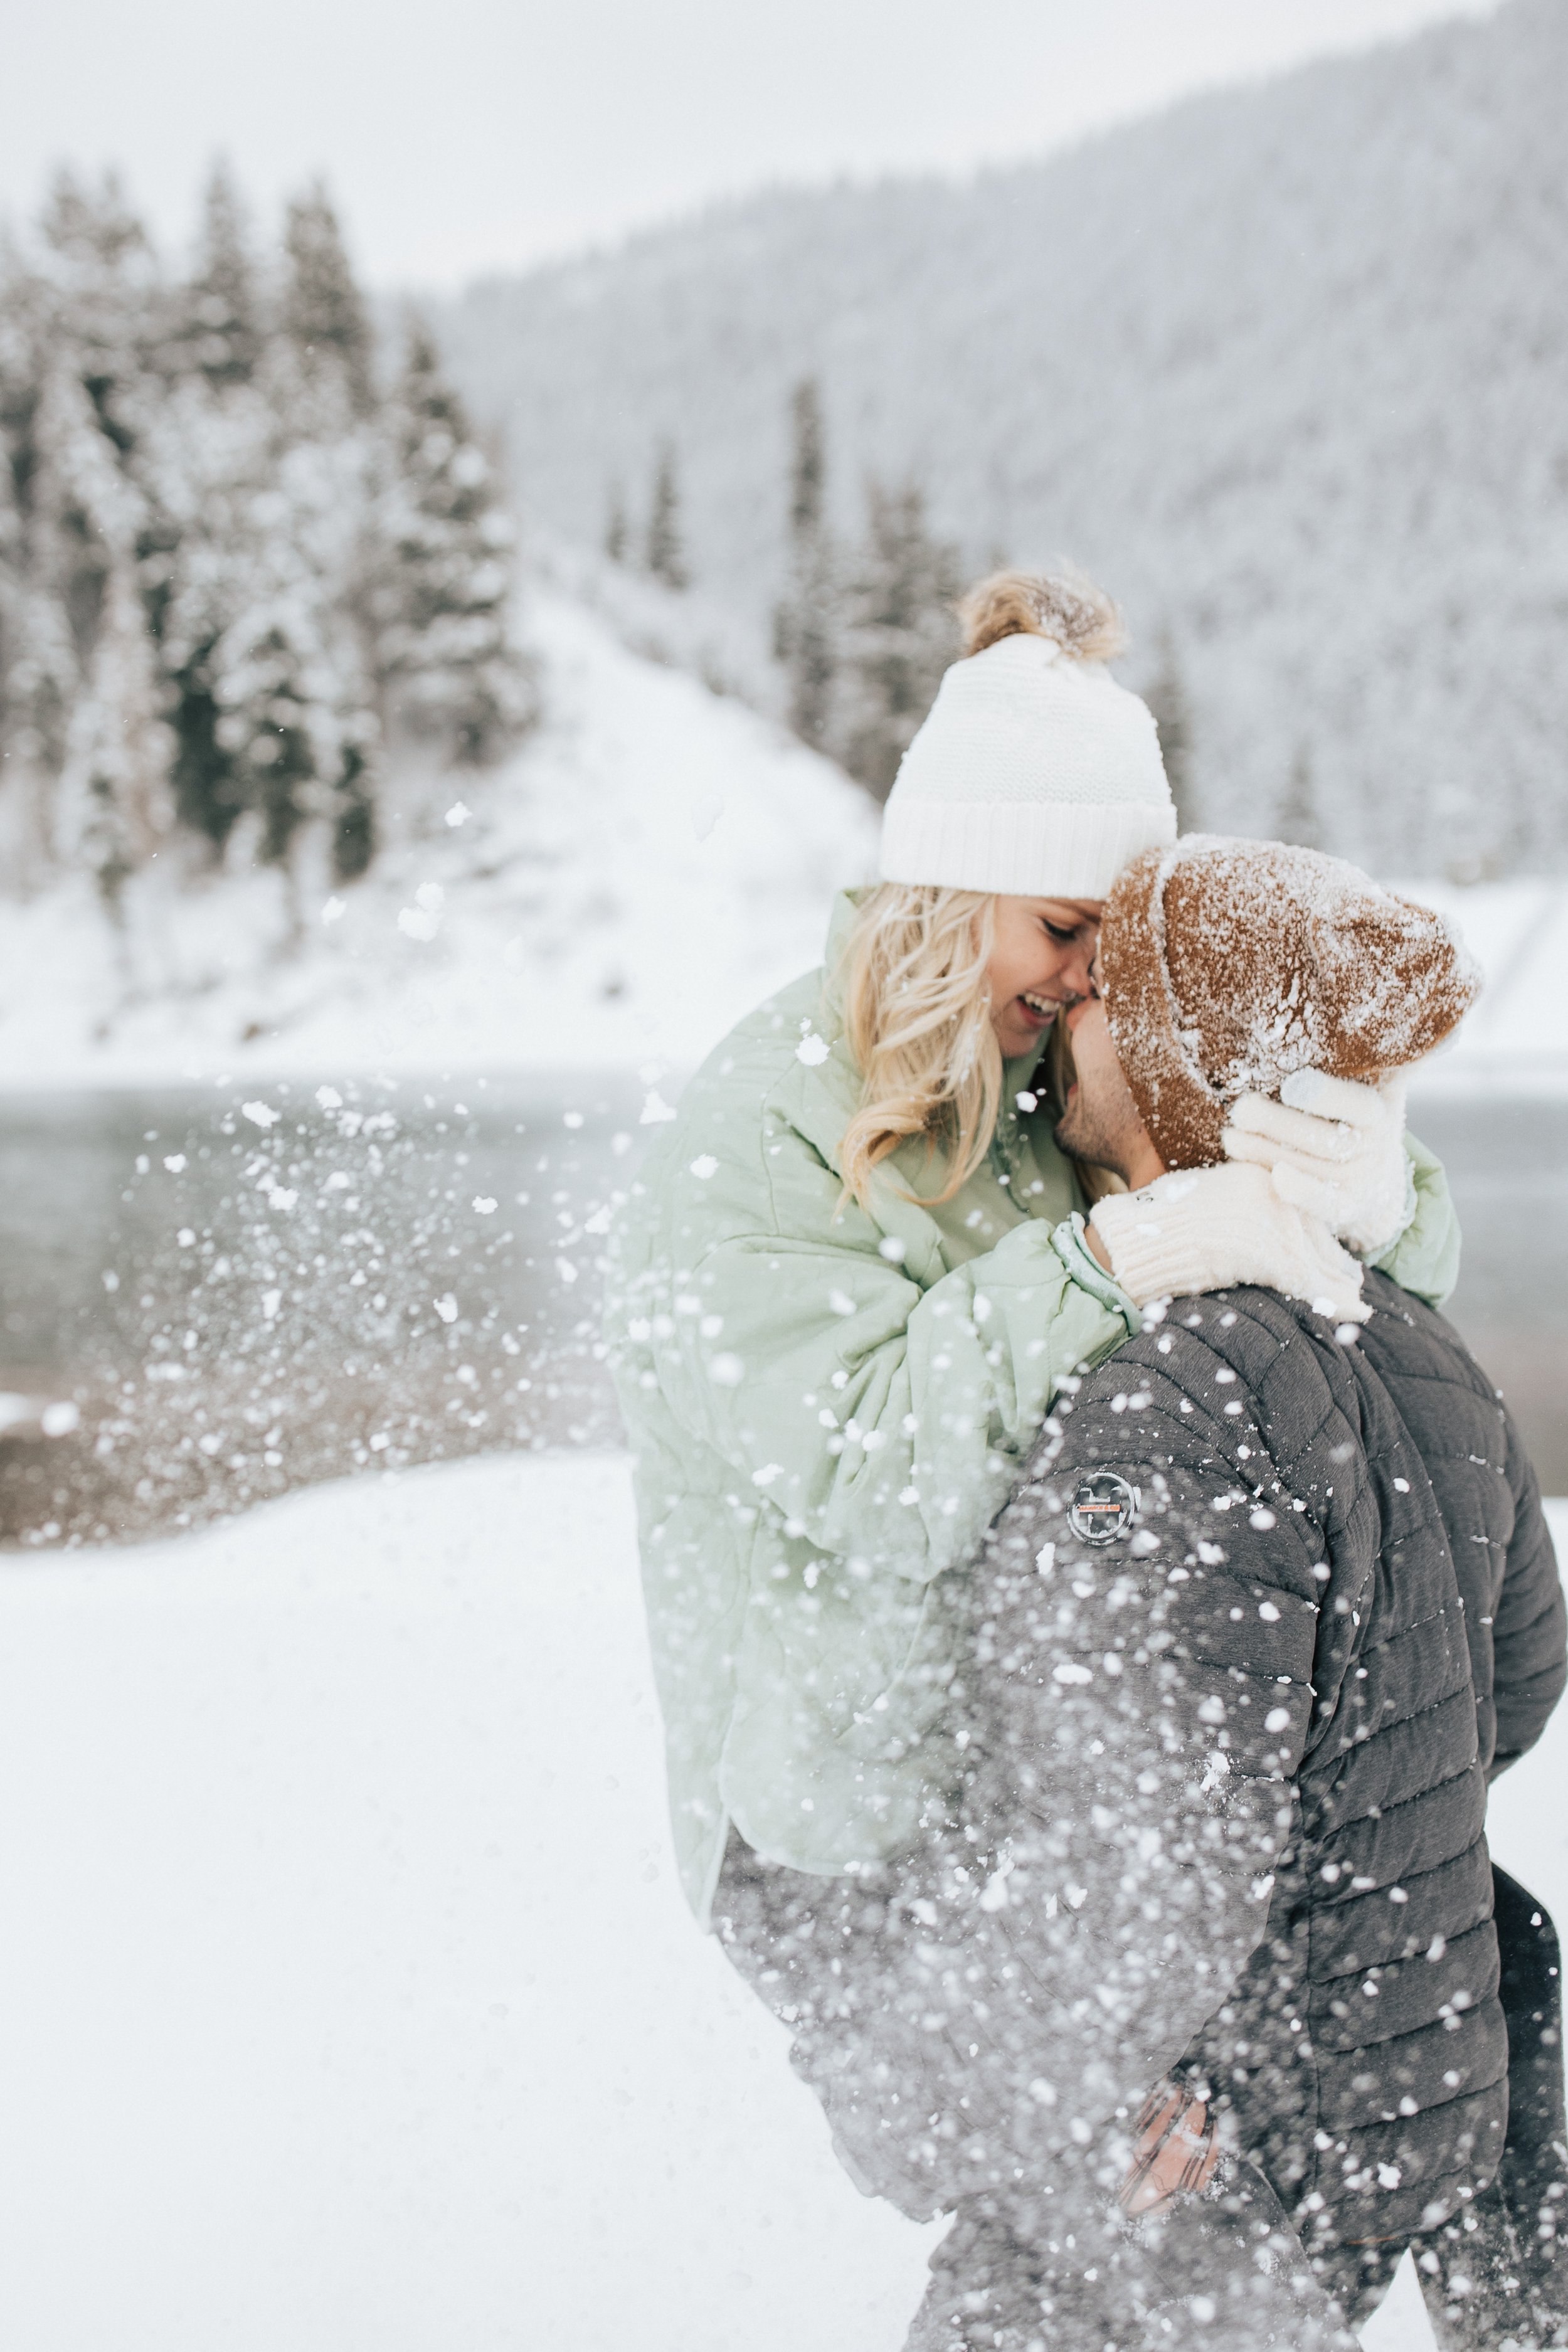  Snowball fight during couples photoshoot in the Utah mountains couple hugs as it's snowing covered in snowflakes engagement session winter outfit inspo #outfitinspo #parkcityphotographer #engagements #winterengagements 